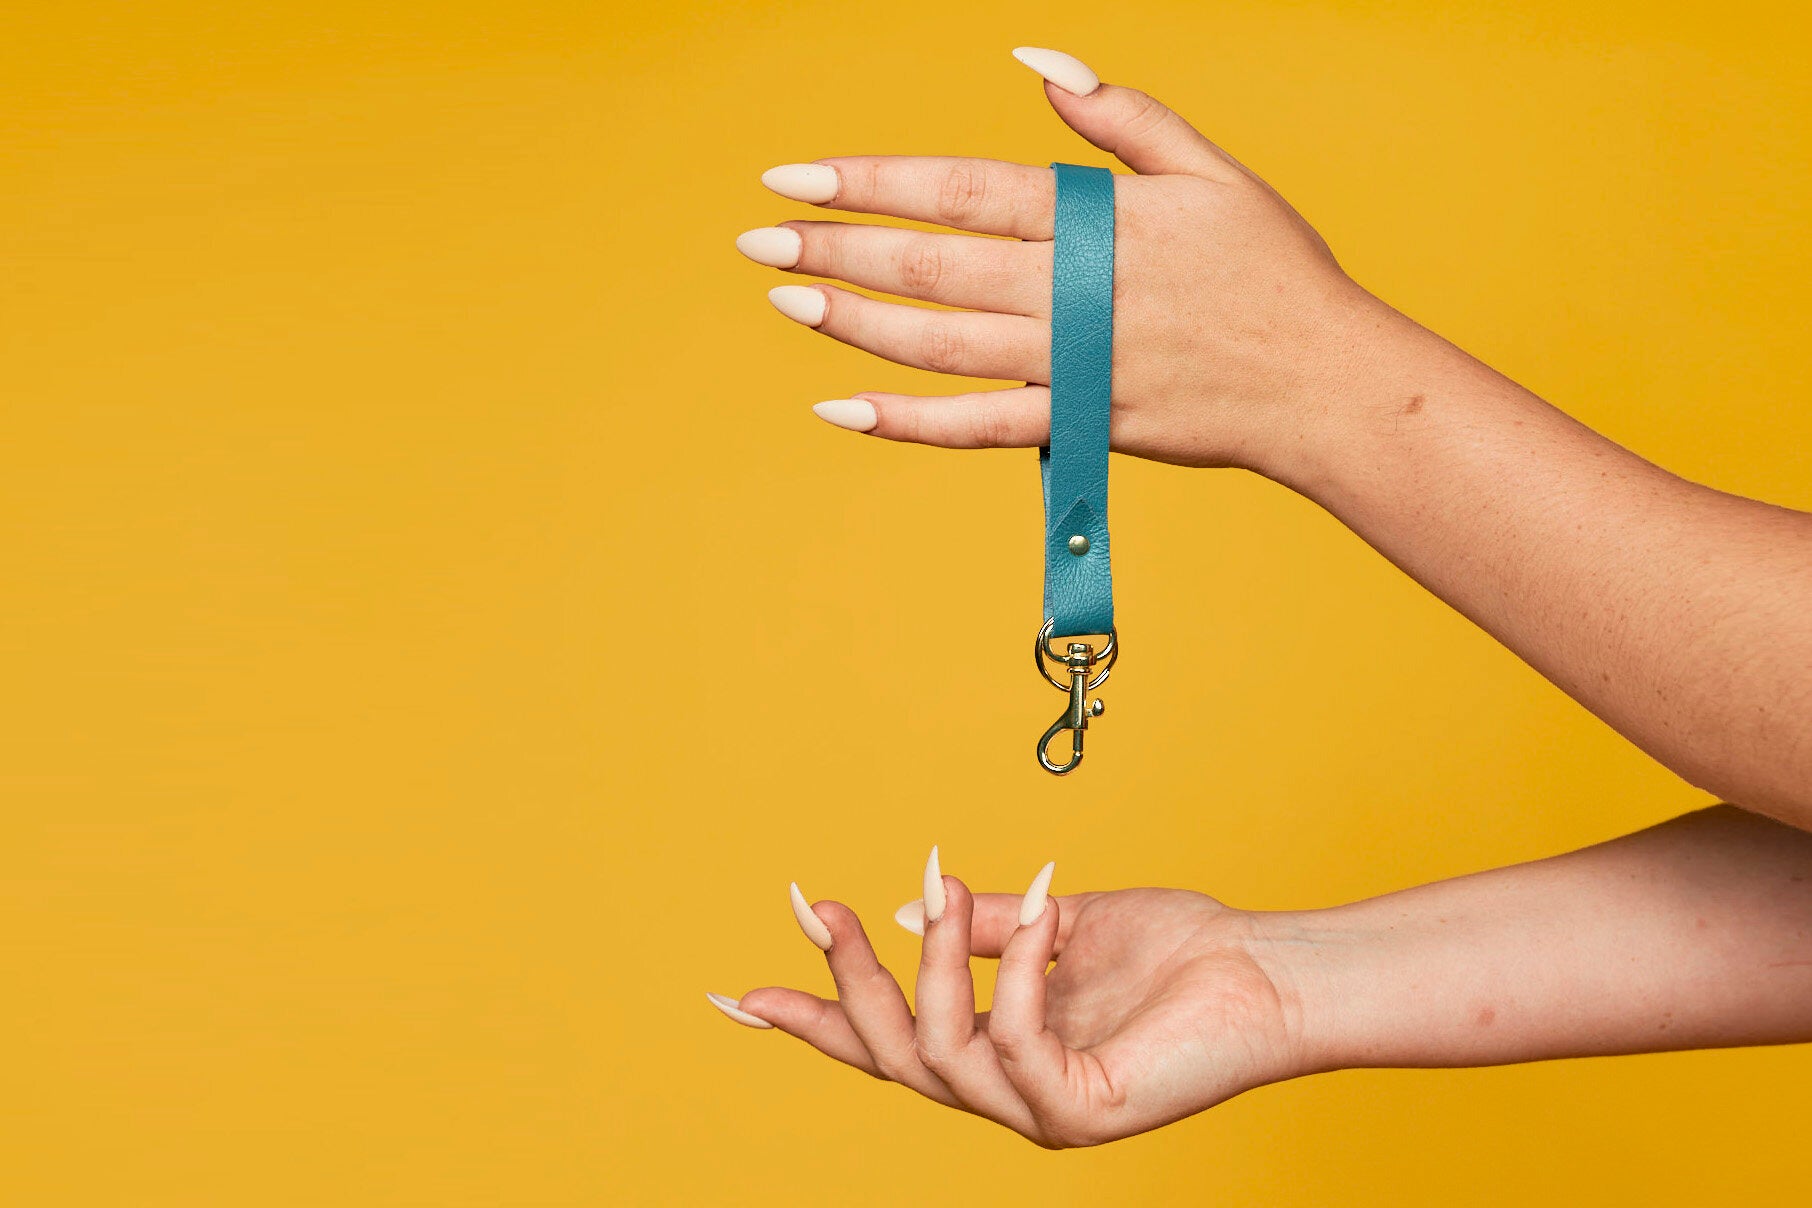 A modern key organizing wrist strap in turquoise authentic leather with gold metal detail hangs from a hand with long white fingernails.